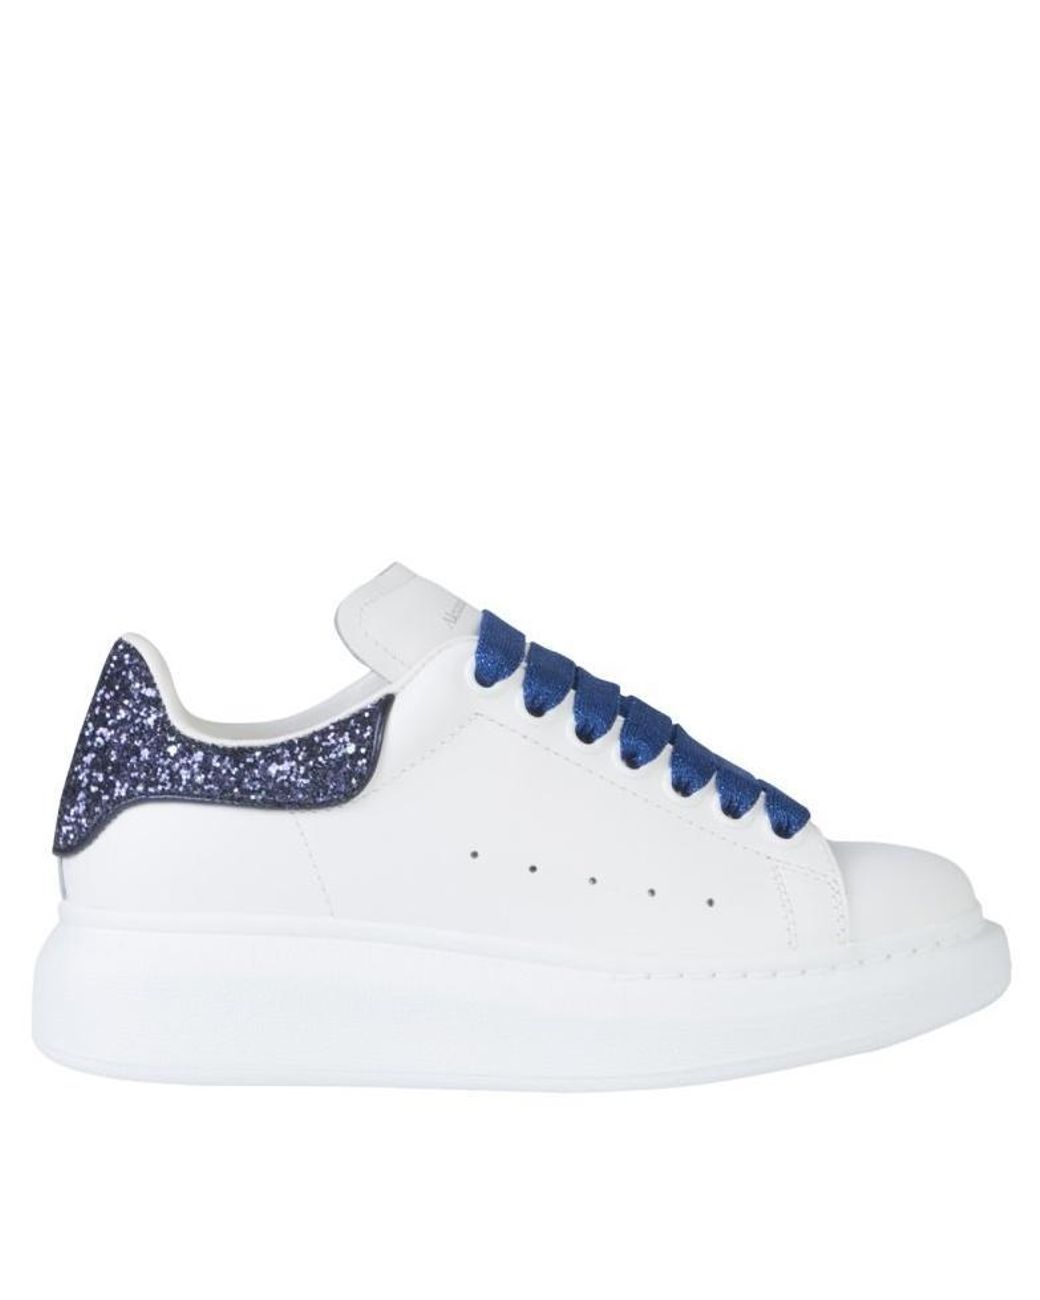 Alexander McQueen White And Navy Glitter Oversized Sneakers in Blue ...